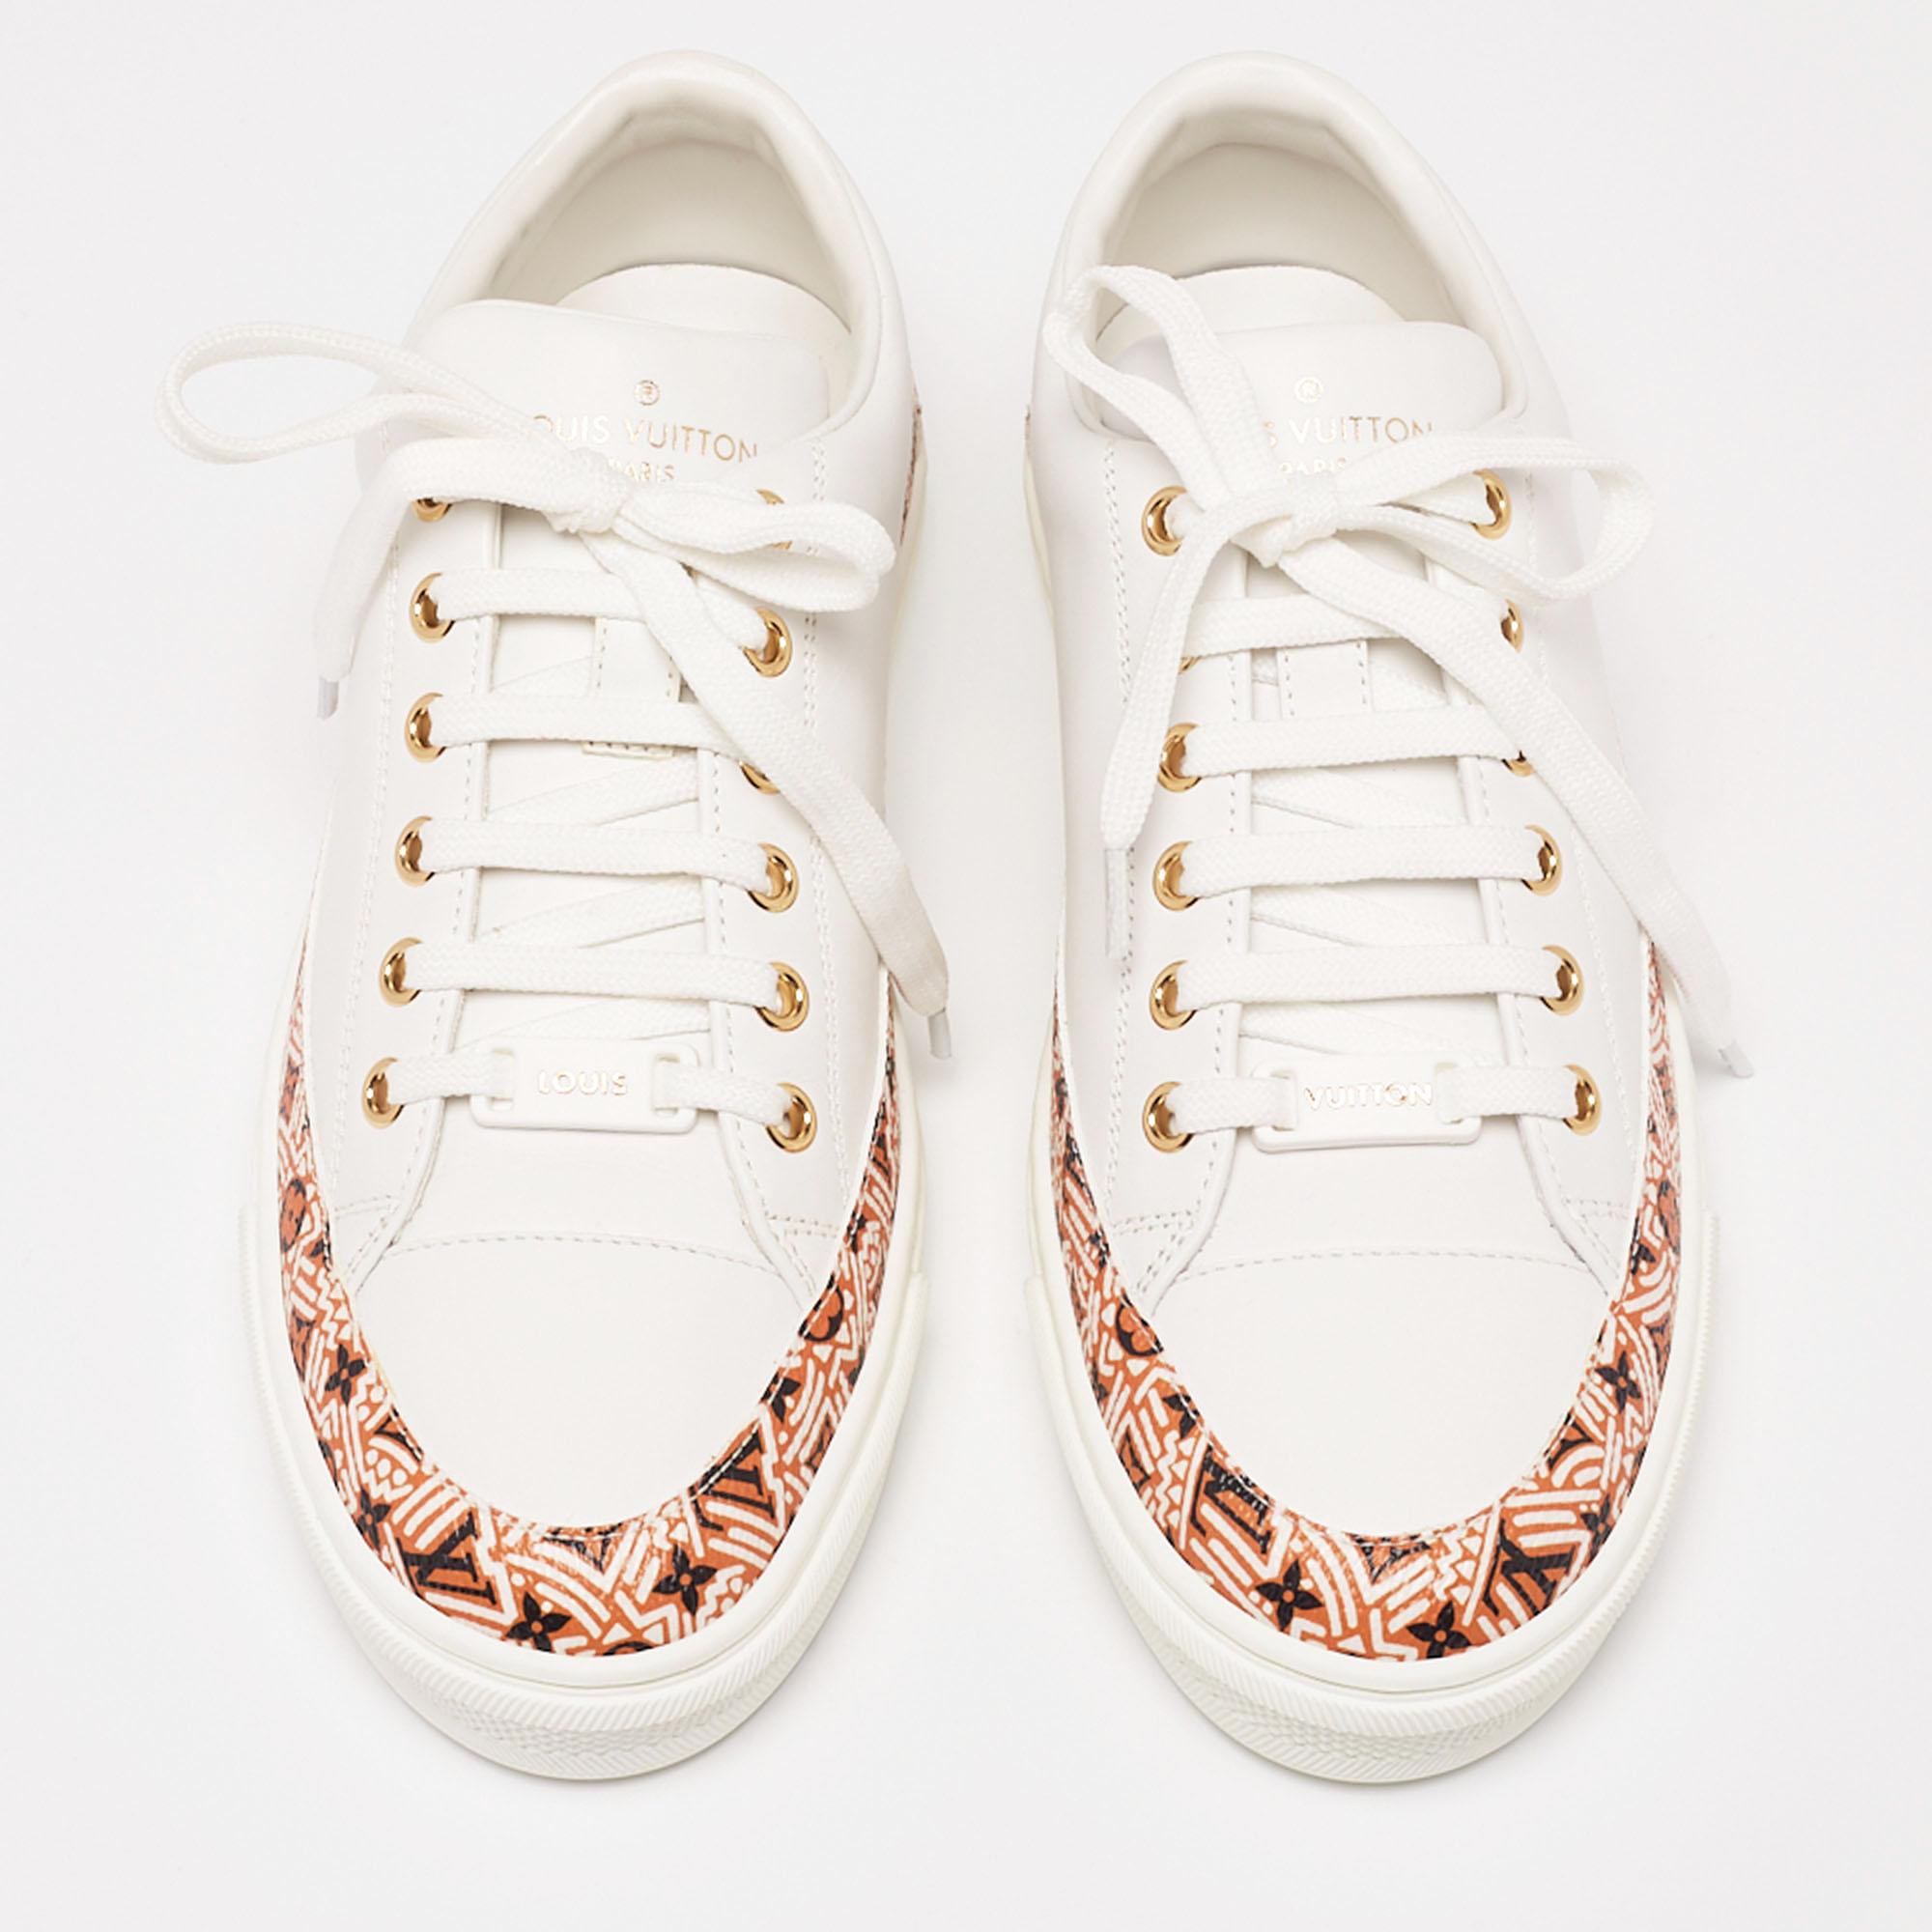 Louis Vuitton gives the low-top sneaker silhouette a simple but impactful touch with the classic monogram on the canvas of the exterior. Complete with leather trims and lace closure, the pair effortlessly essays casual elegance.

Includes: Original